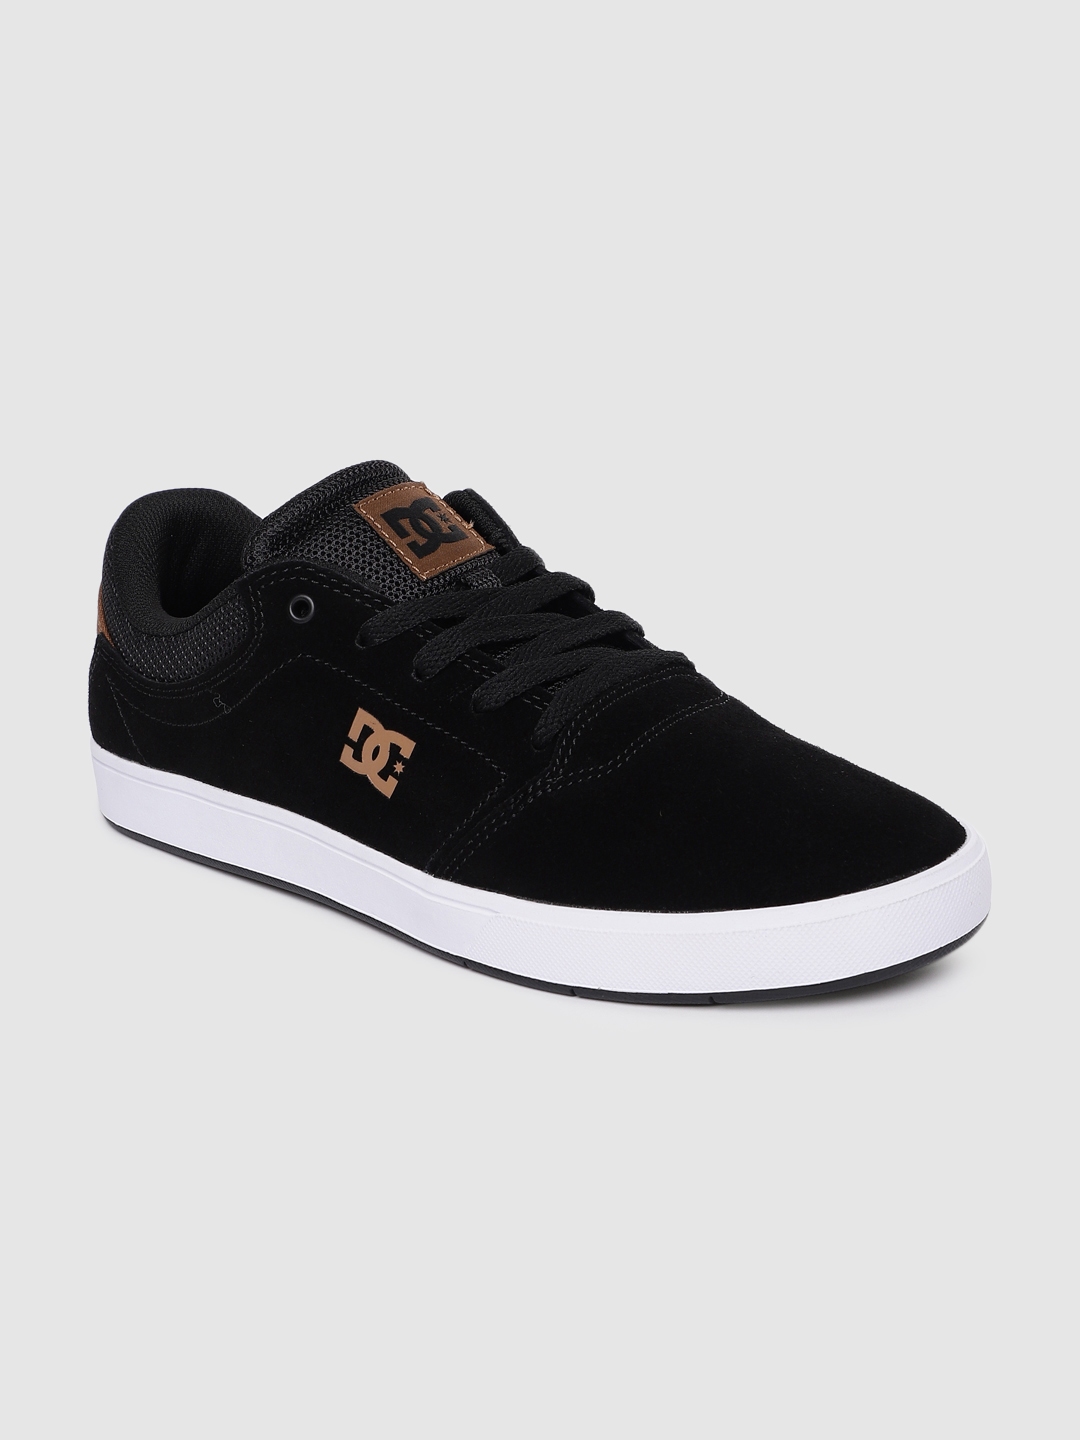 Buy DC Men Black Solid Suede Sneakers - Casual Shoes for Men 10313059 ...